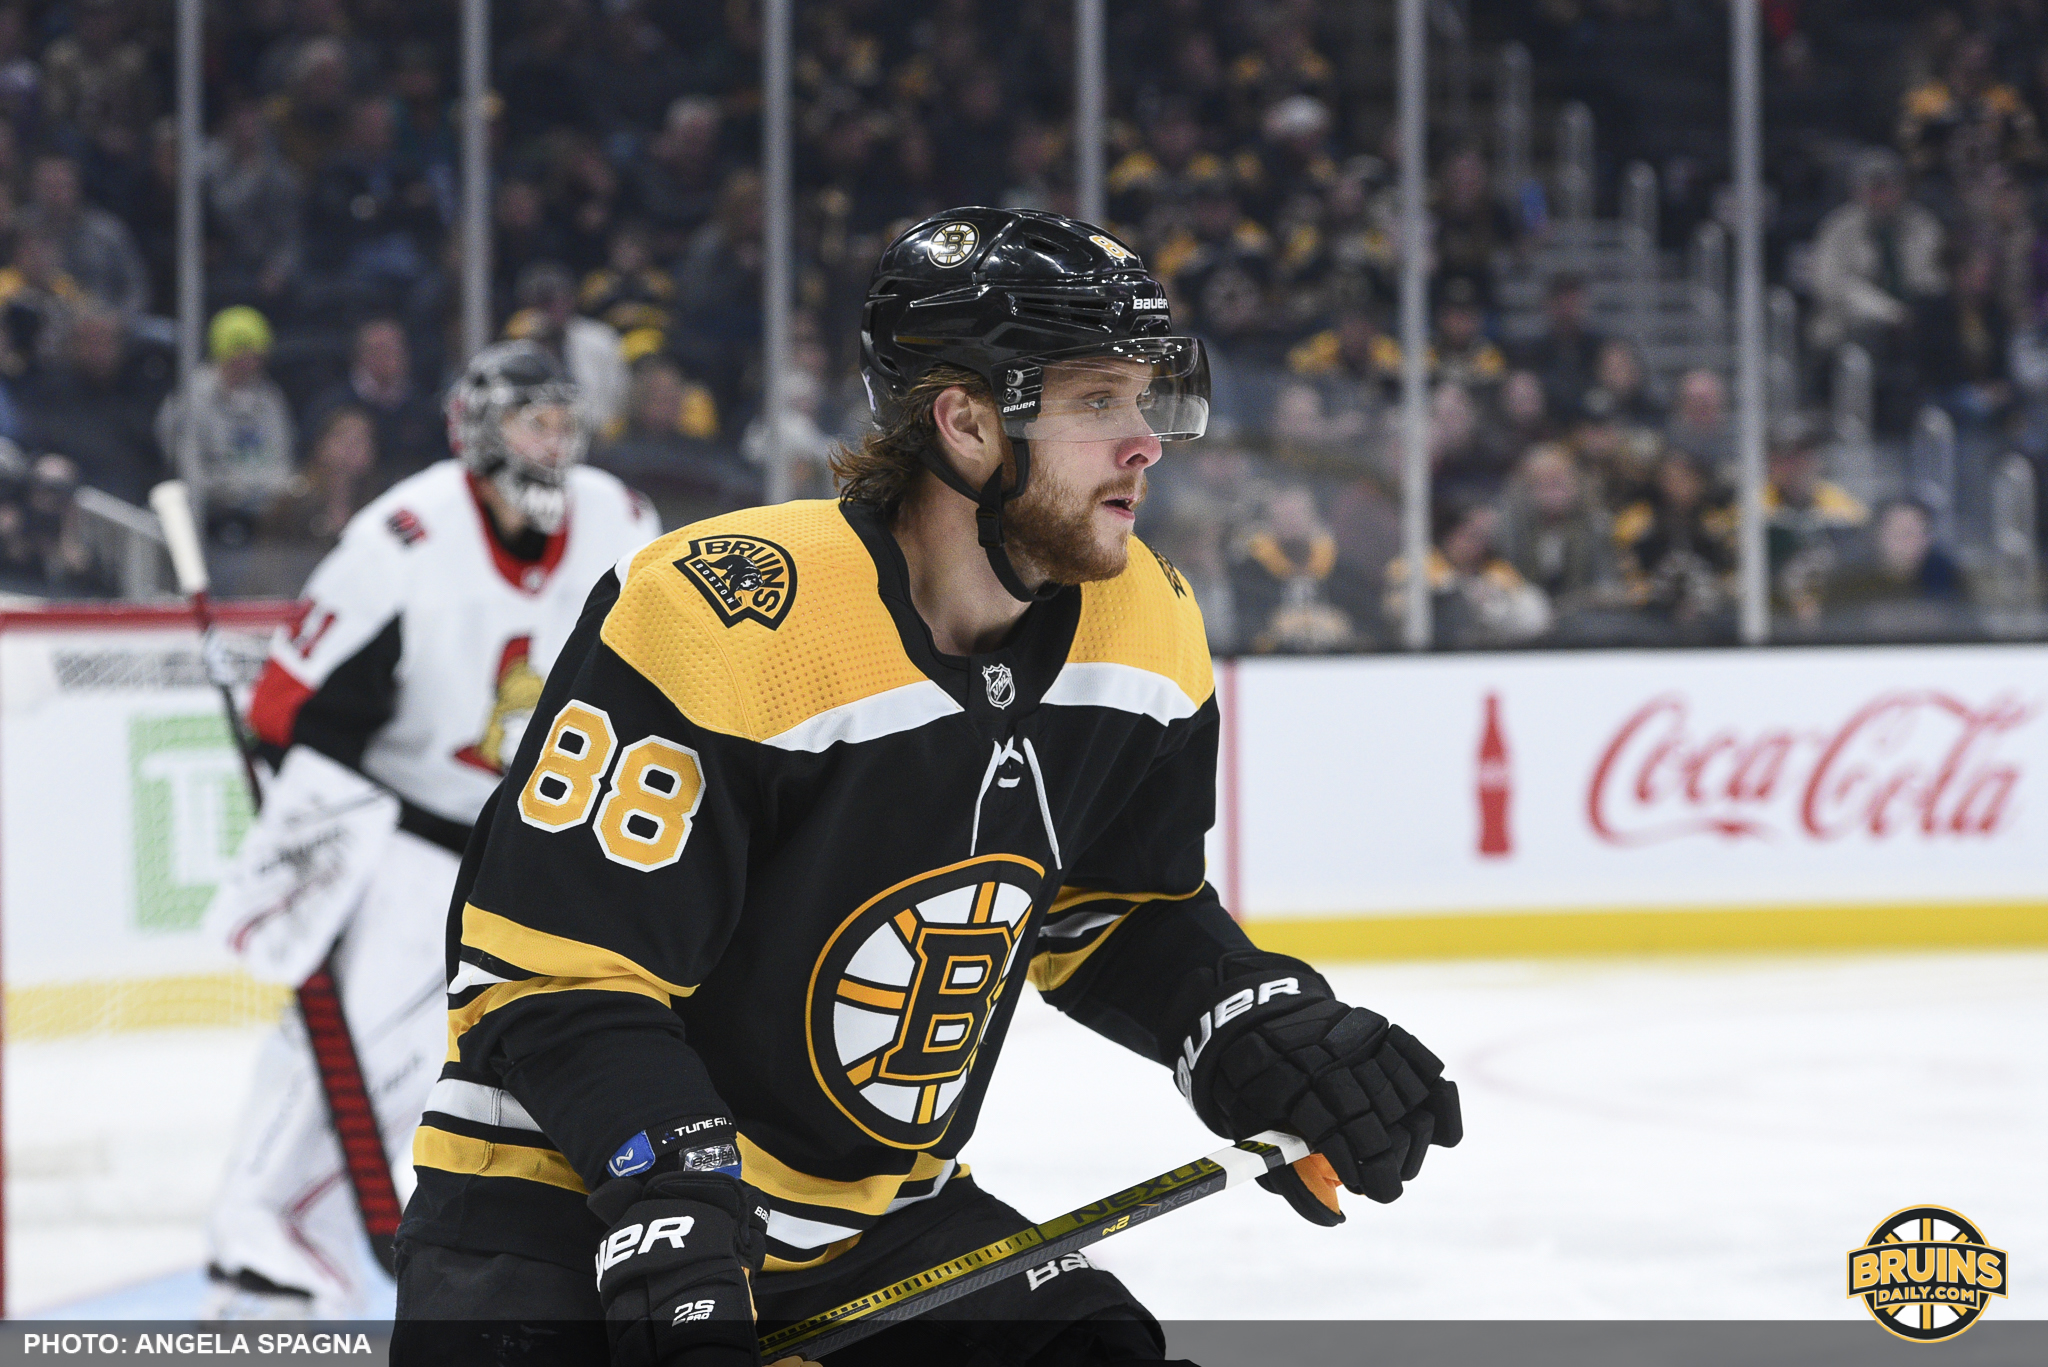 Bruins-Isles takeaways: What we learned from Boston's 'biggest win